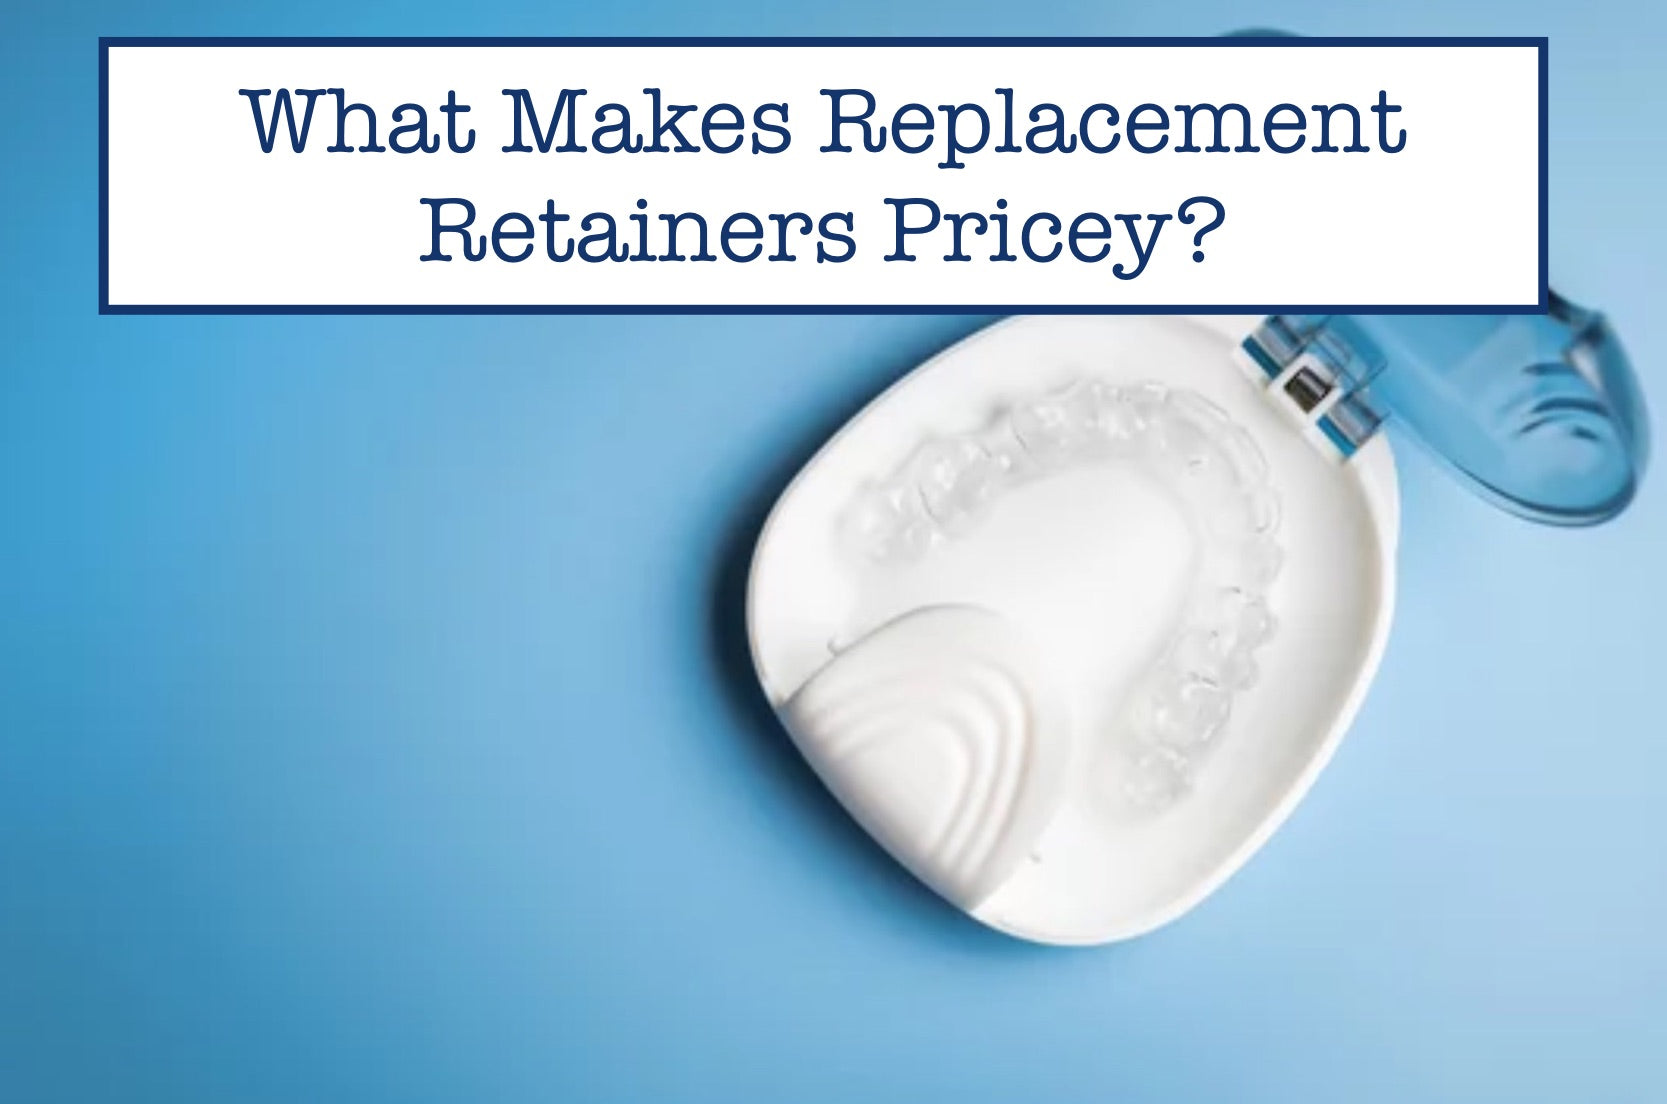 What Makes Replacement Retainers Pricey?